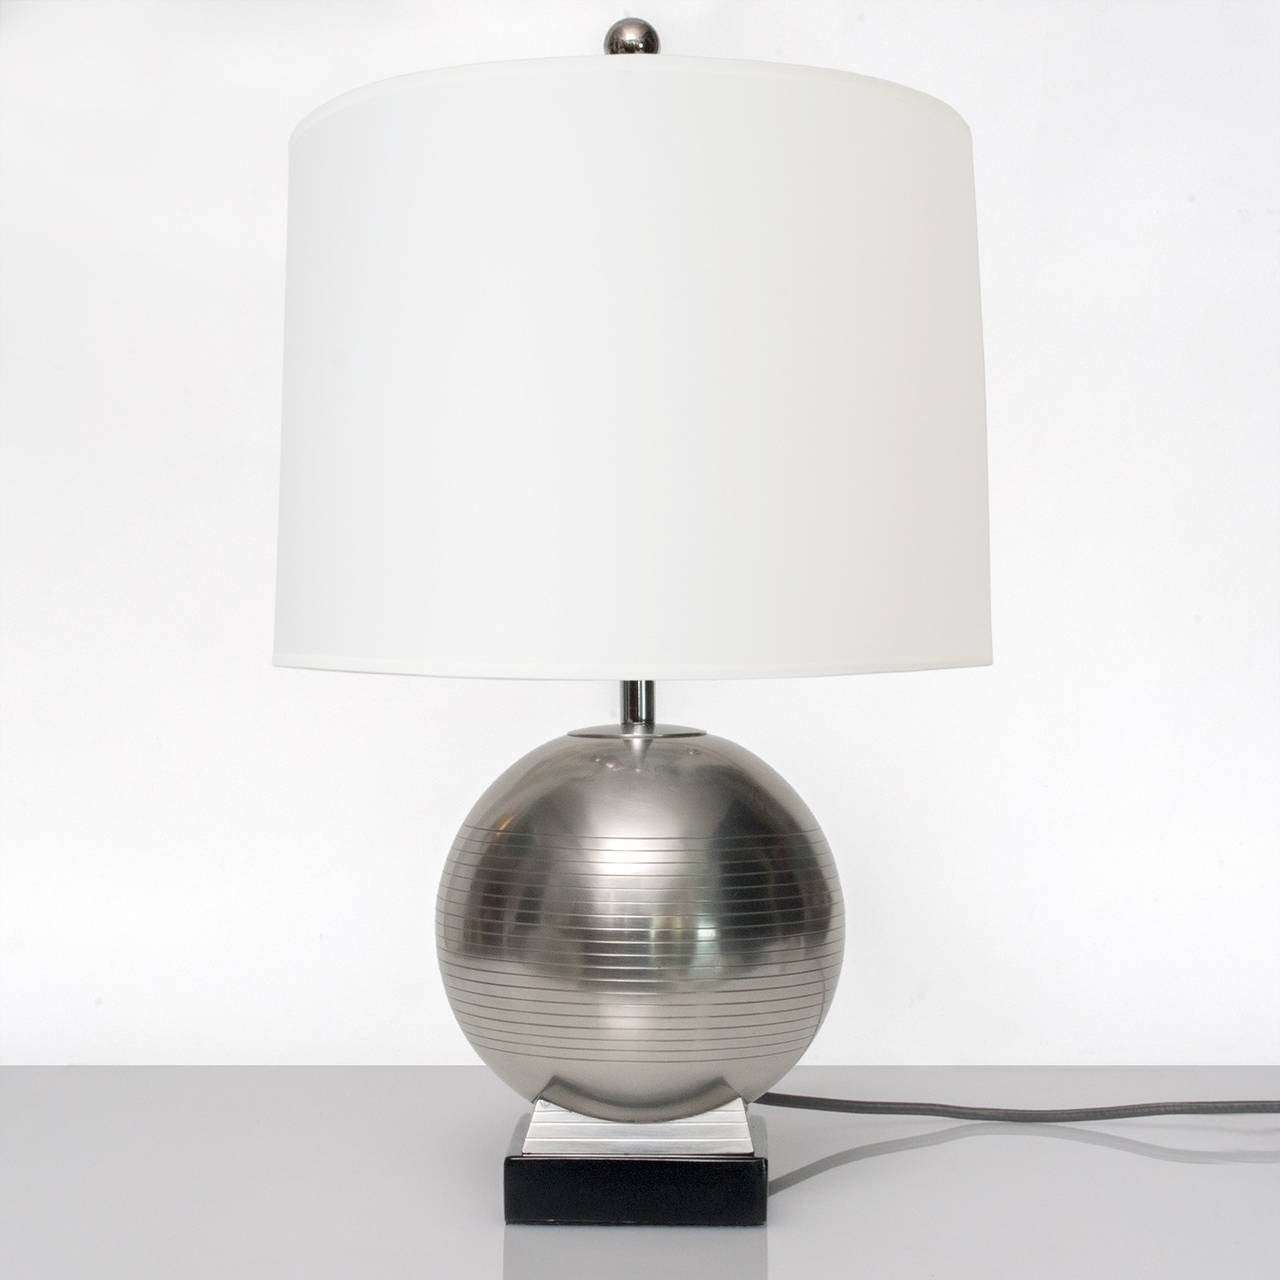 Spherical Swedish Art Deco pewter table lamp on a lacquered wood plinth detailed with a series of horizontal groves. Made by G.A.B. (Guldsmedsaktiebolaget) circa 1930. Newly polished, lacquered and rewired for the USA, with a nickel plated double